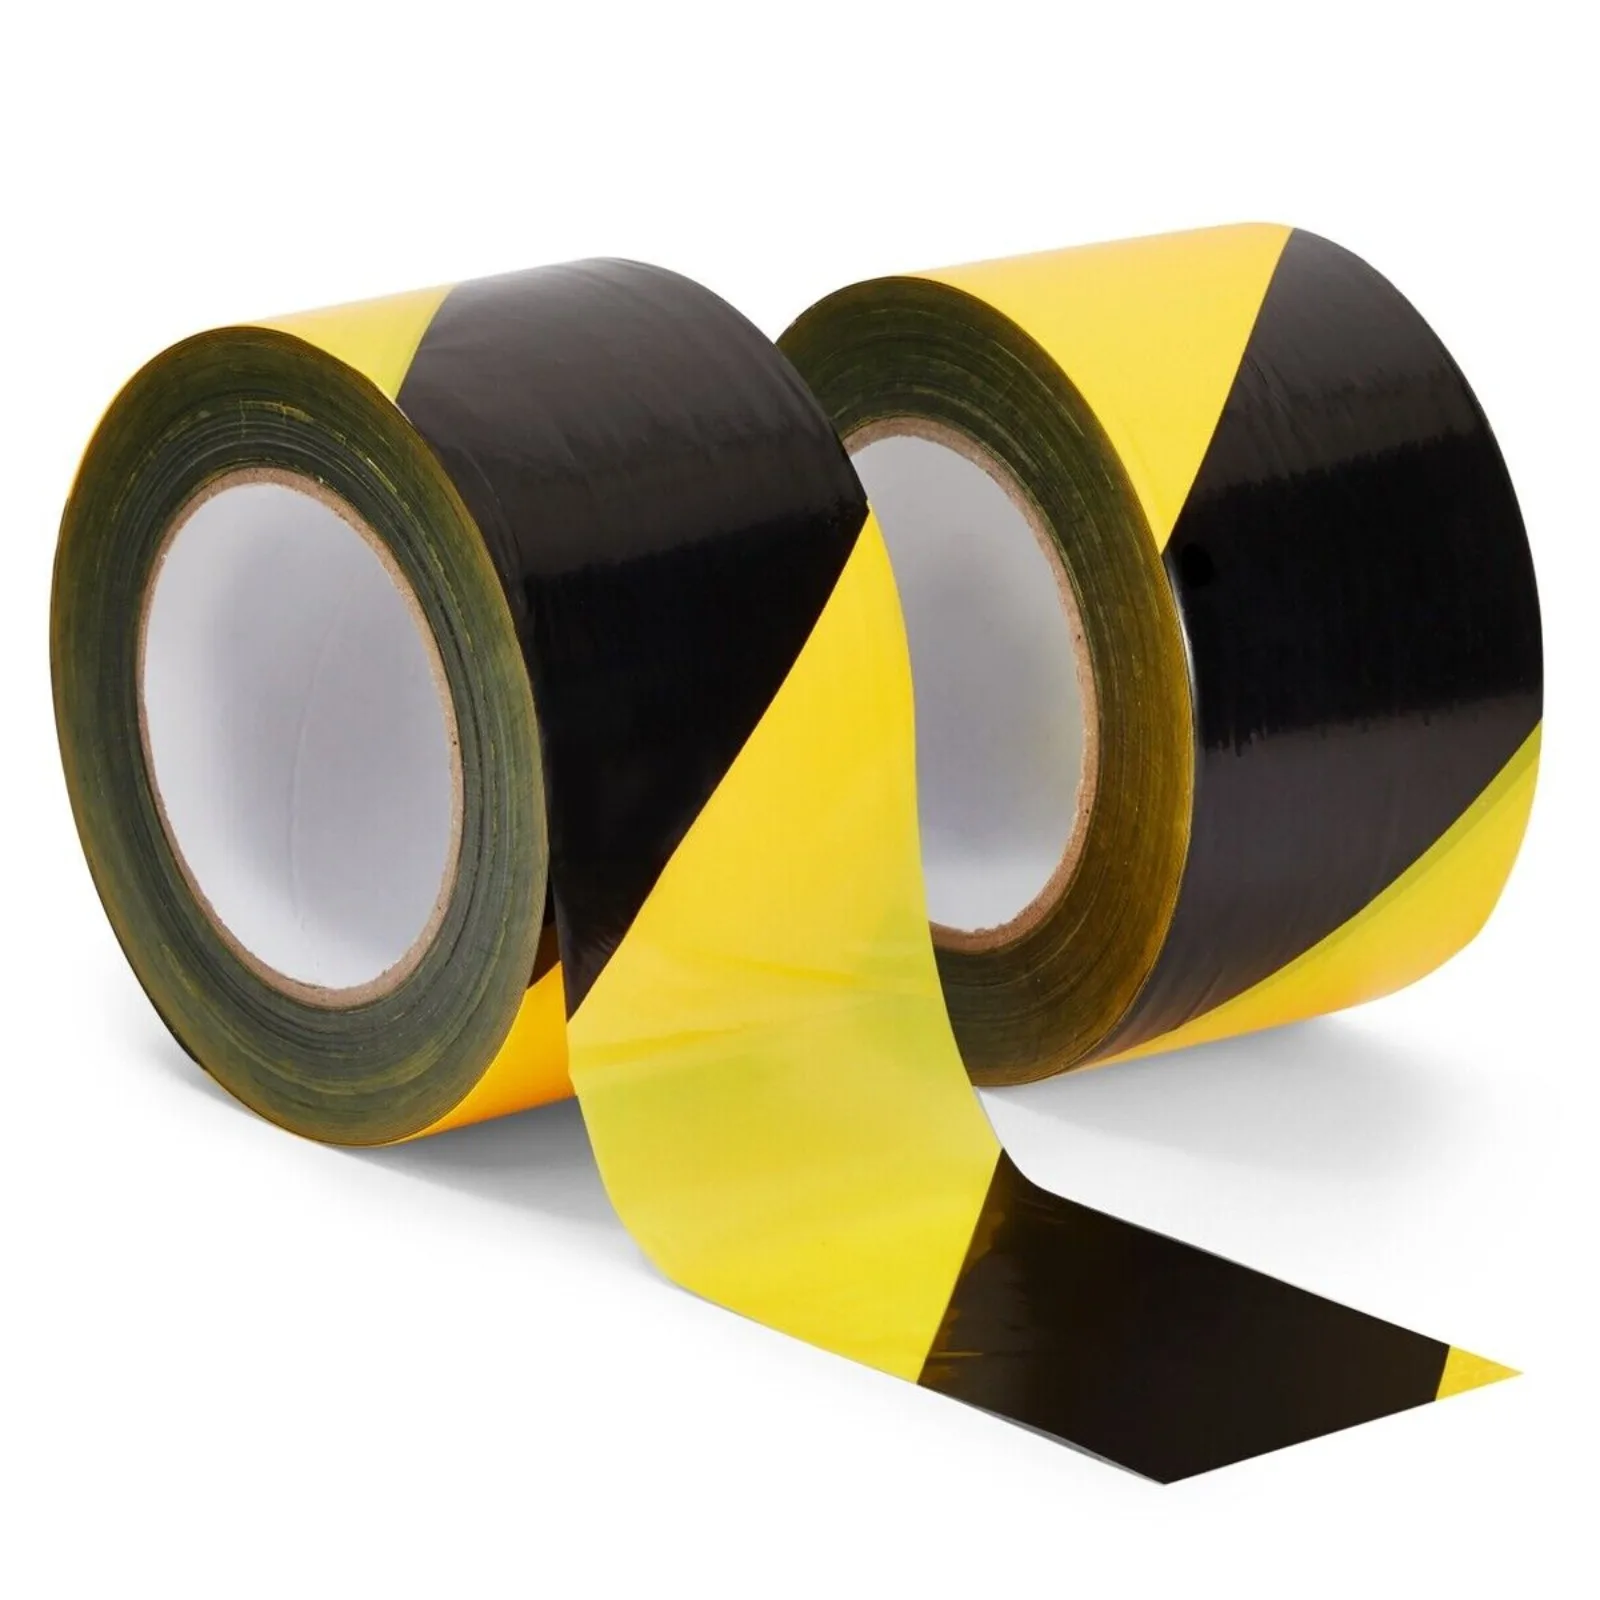 

US 2 Pack of Caution Tape Rolls, Black & Yellow Barricade Tape, 2.8" x 660ft Rolls-